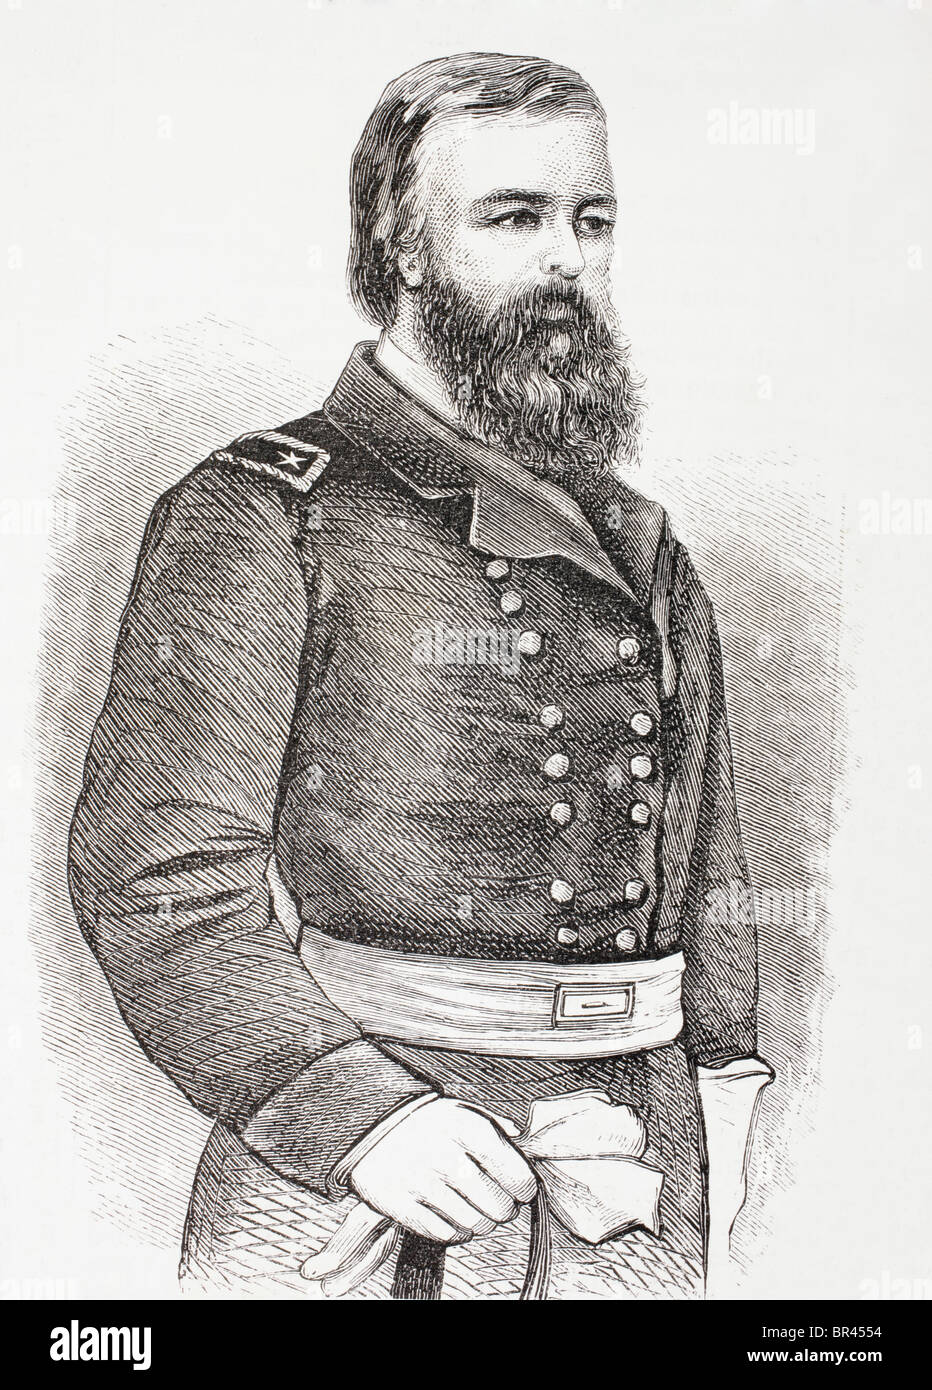 John Pope, 1822 – 1892. United States Army officer and Union general in American Civil War. Stock Photo